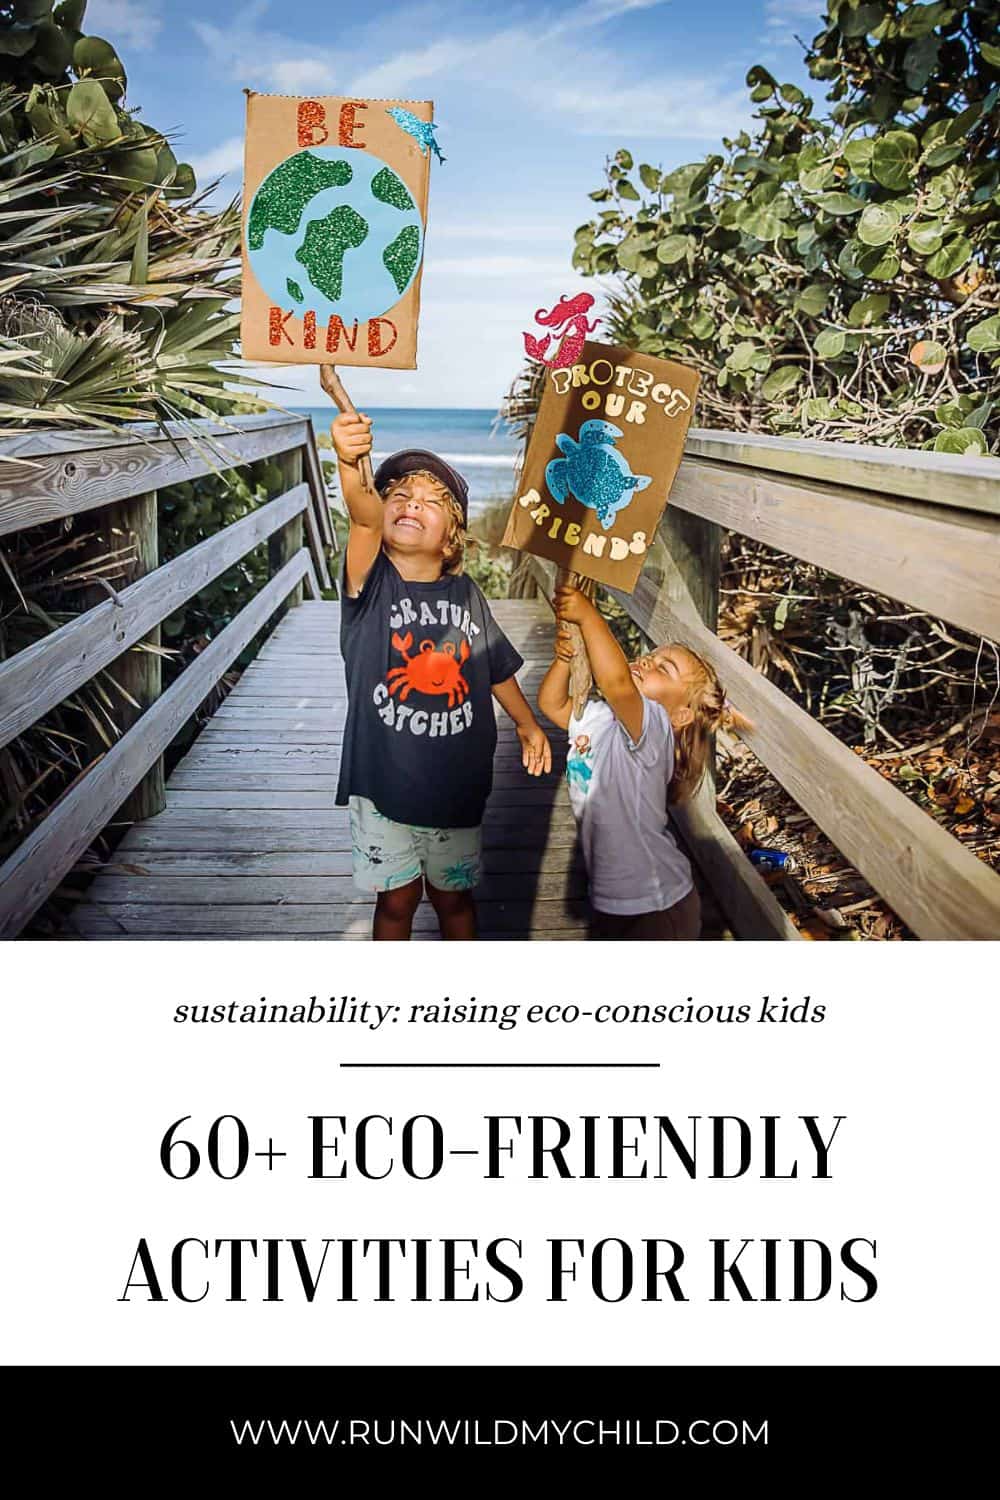 eco-friendly sustainability activities for kids